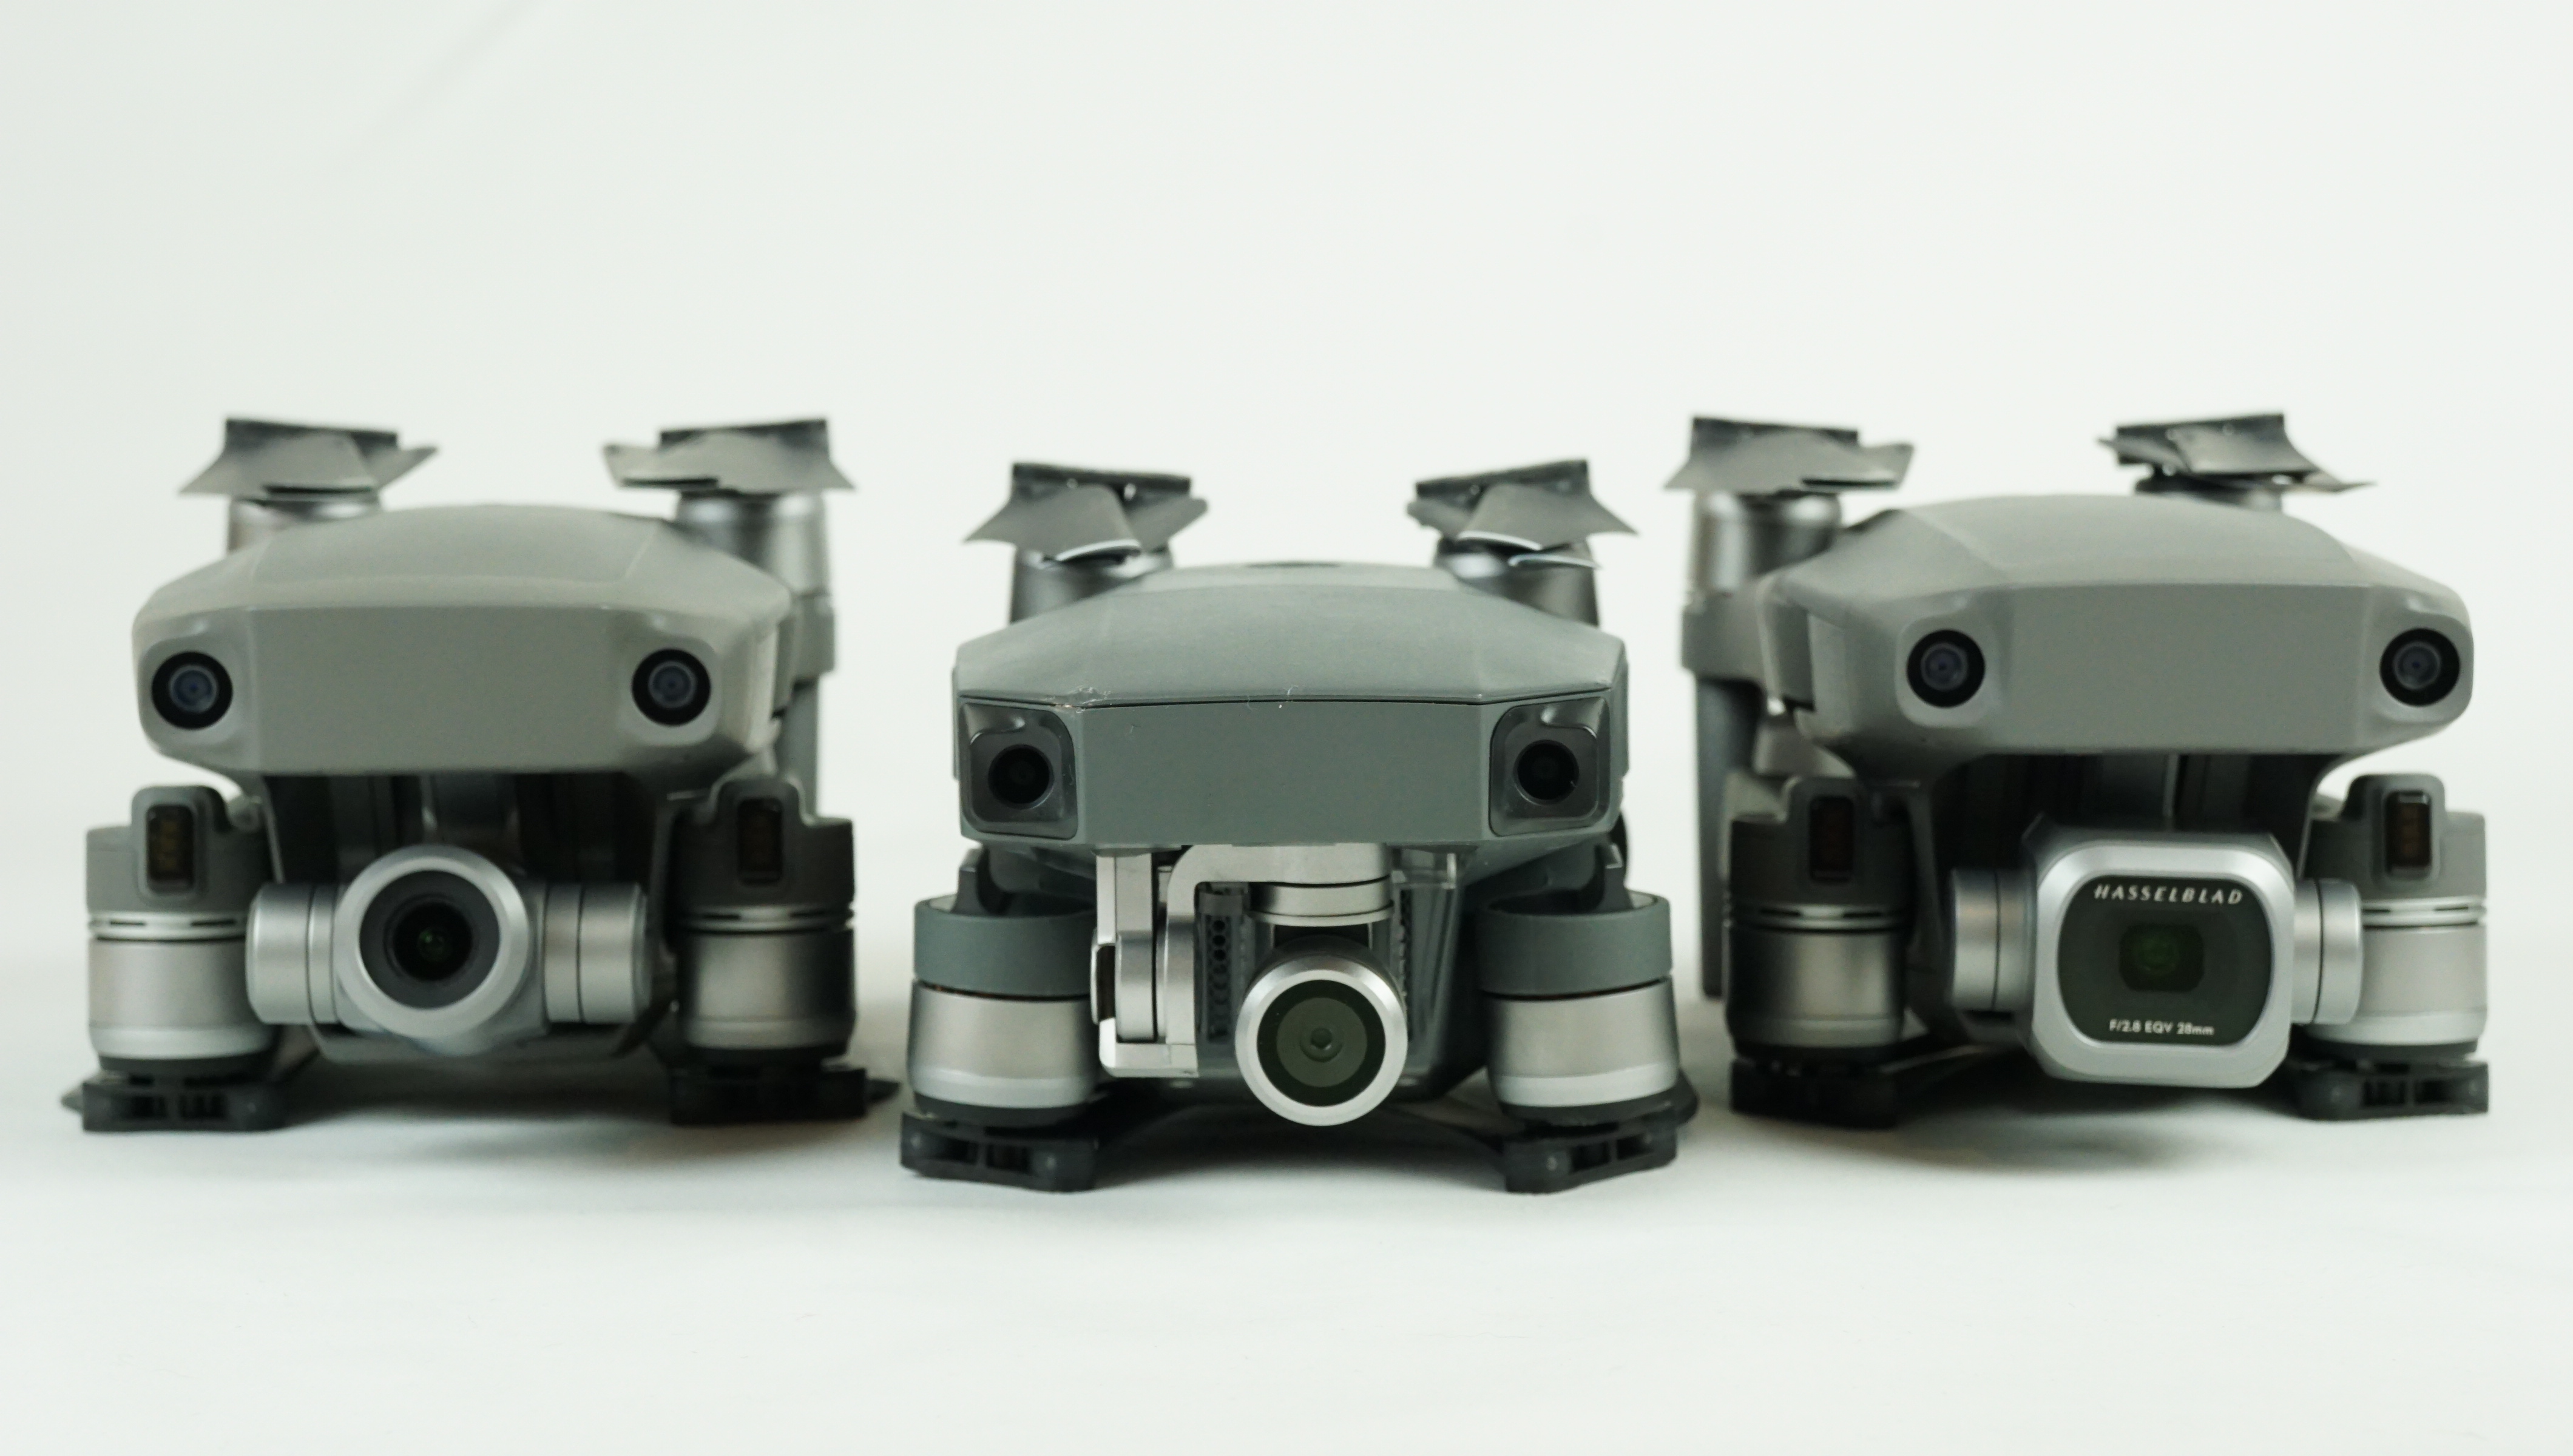 DJI Mavic 2 Pro The Pro Which is Better for YOU?